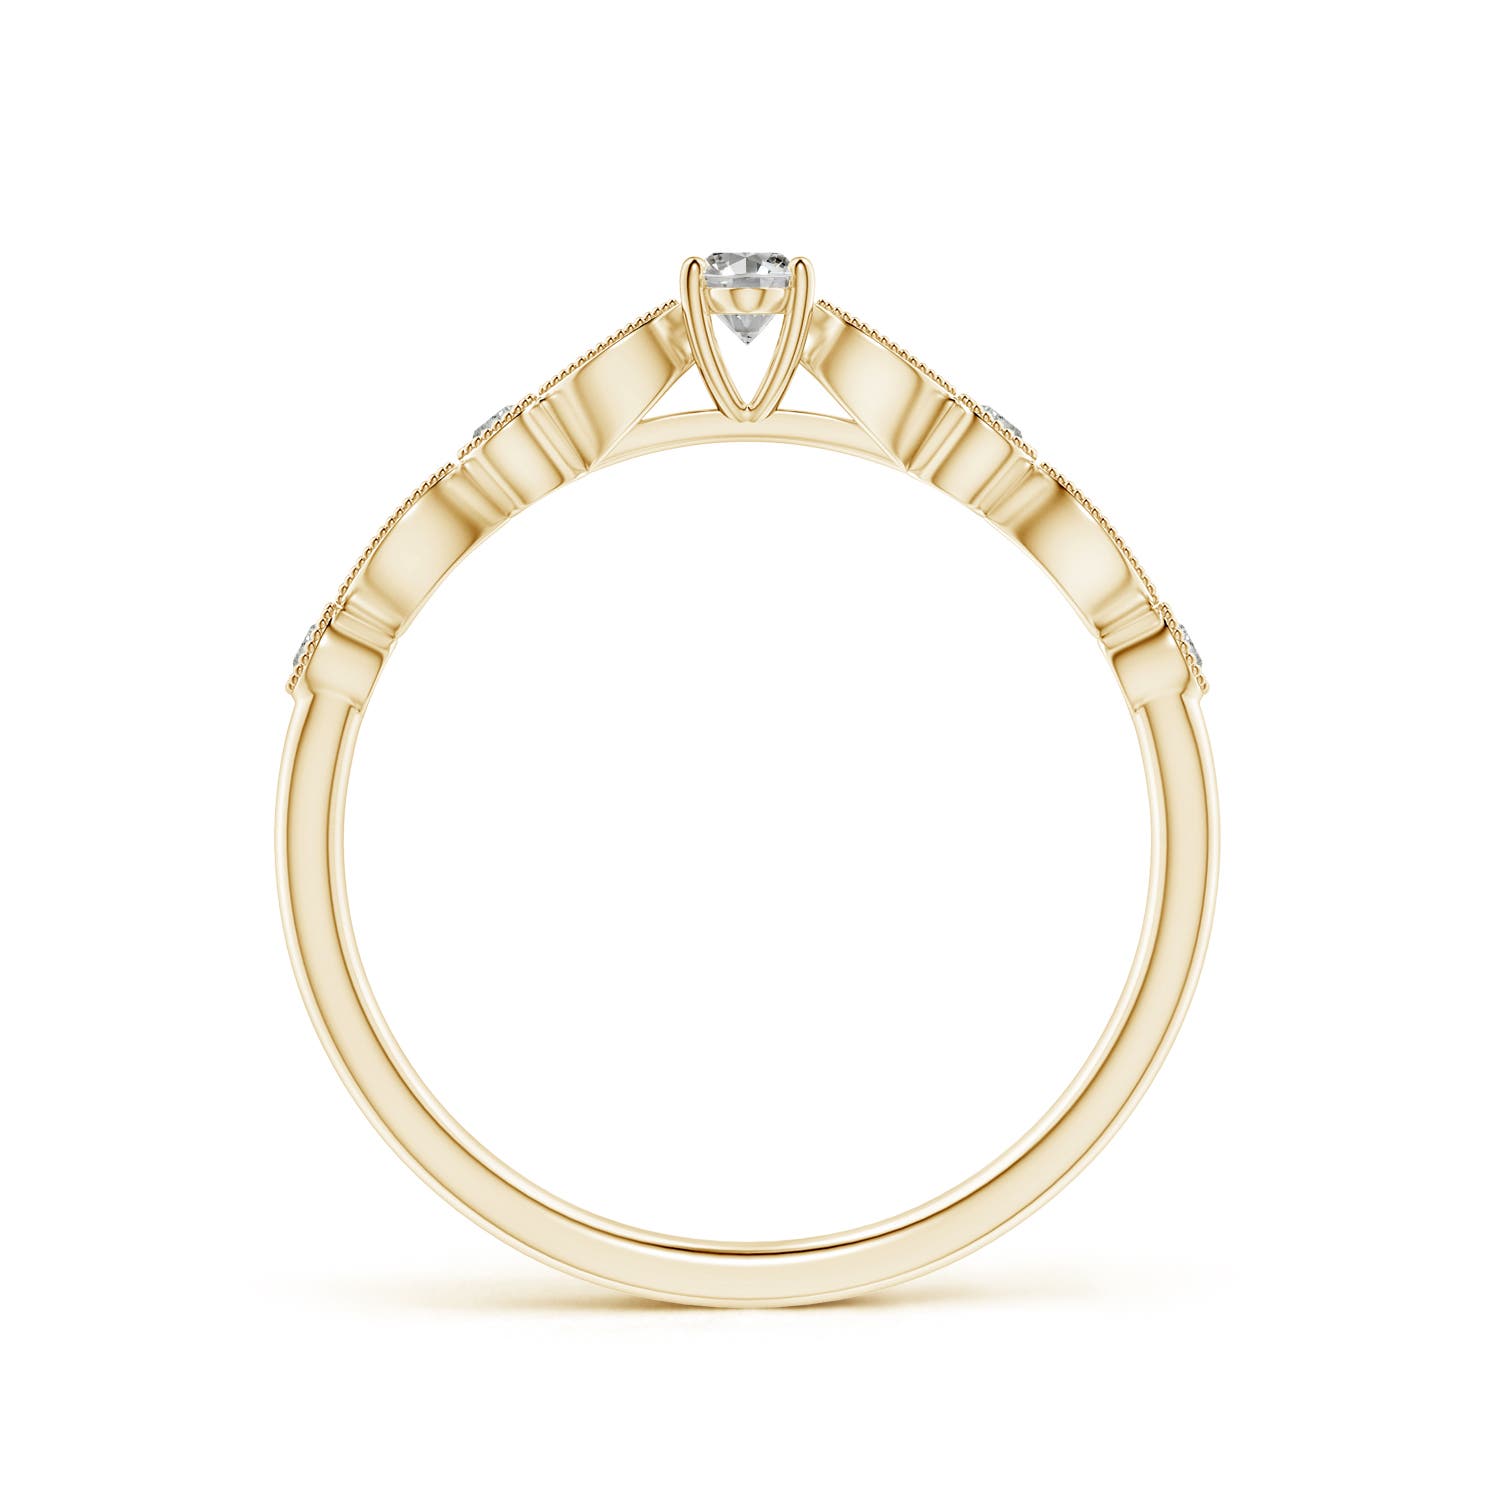 K, I3 / 0.25 CT / 14 KT Yellow Gold